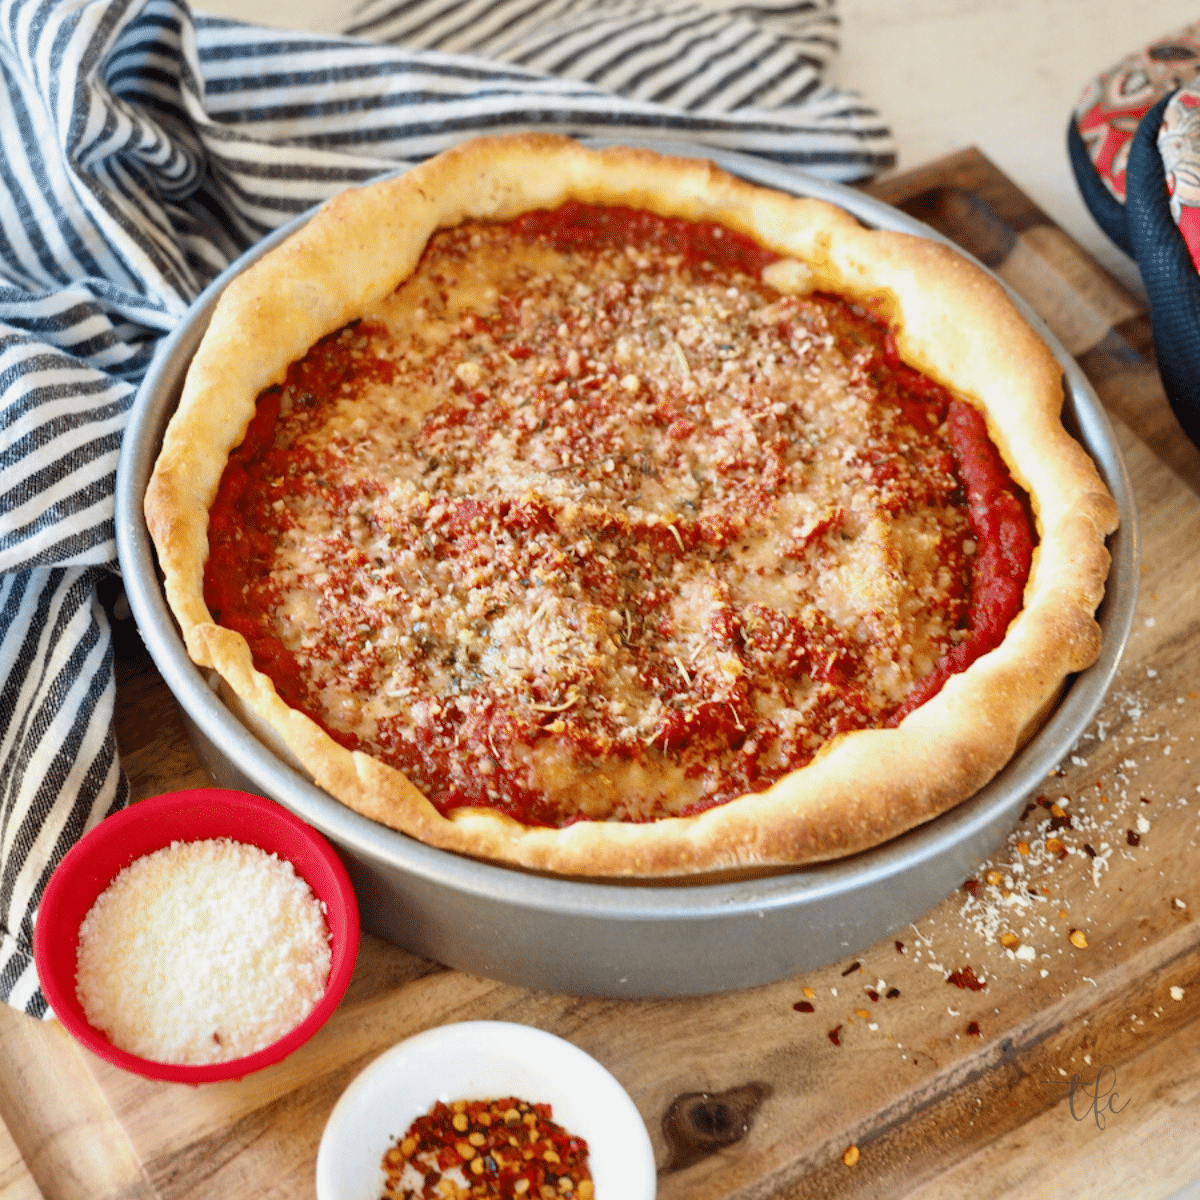 https://www.thefreshcooky.com/wp-content/uploads/2021/09/Chicago-Style-Deep-Dish-Pizza-Square.png